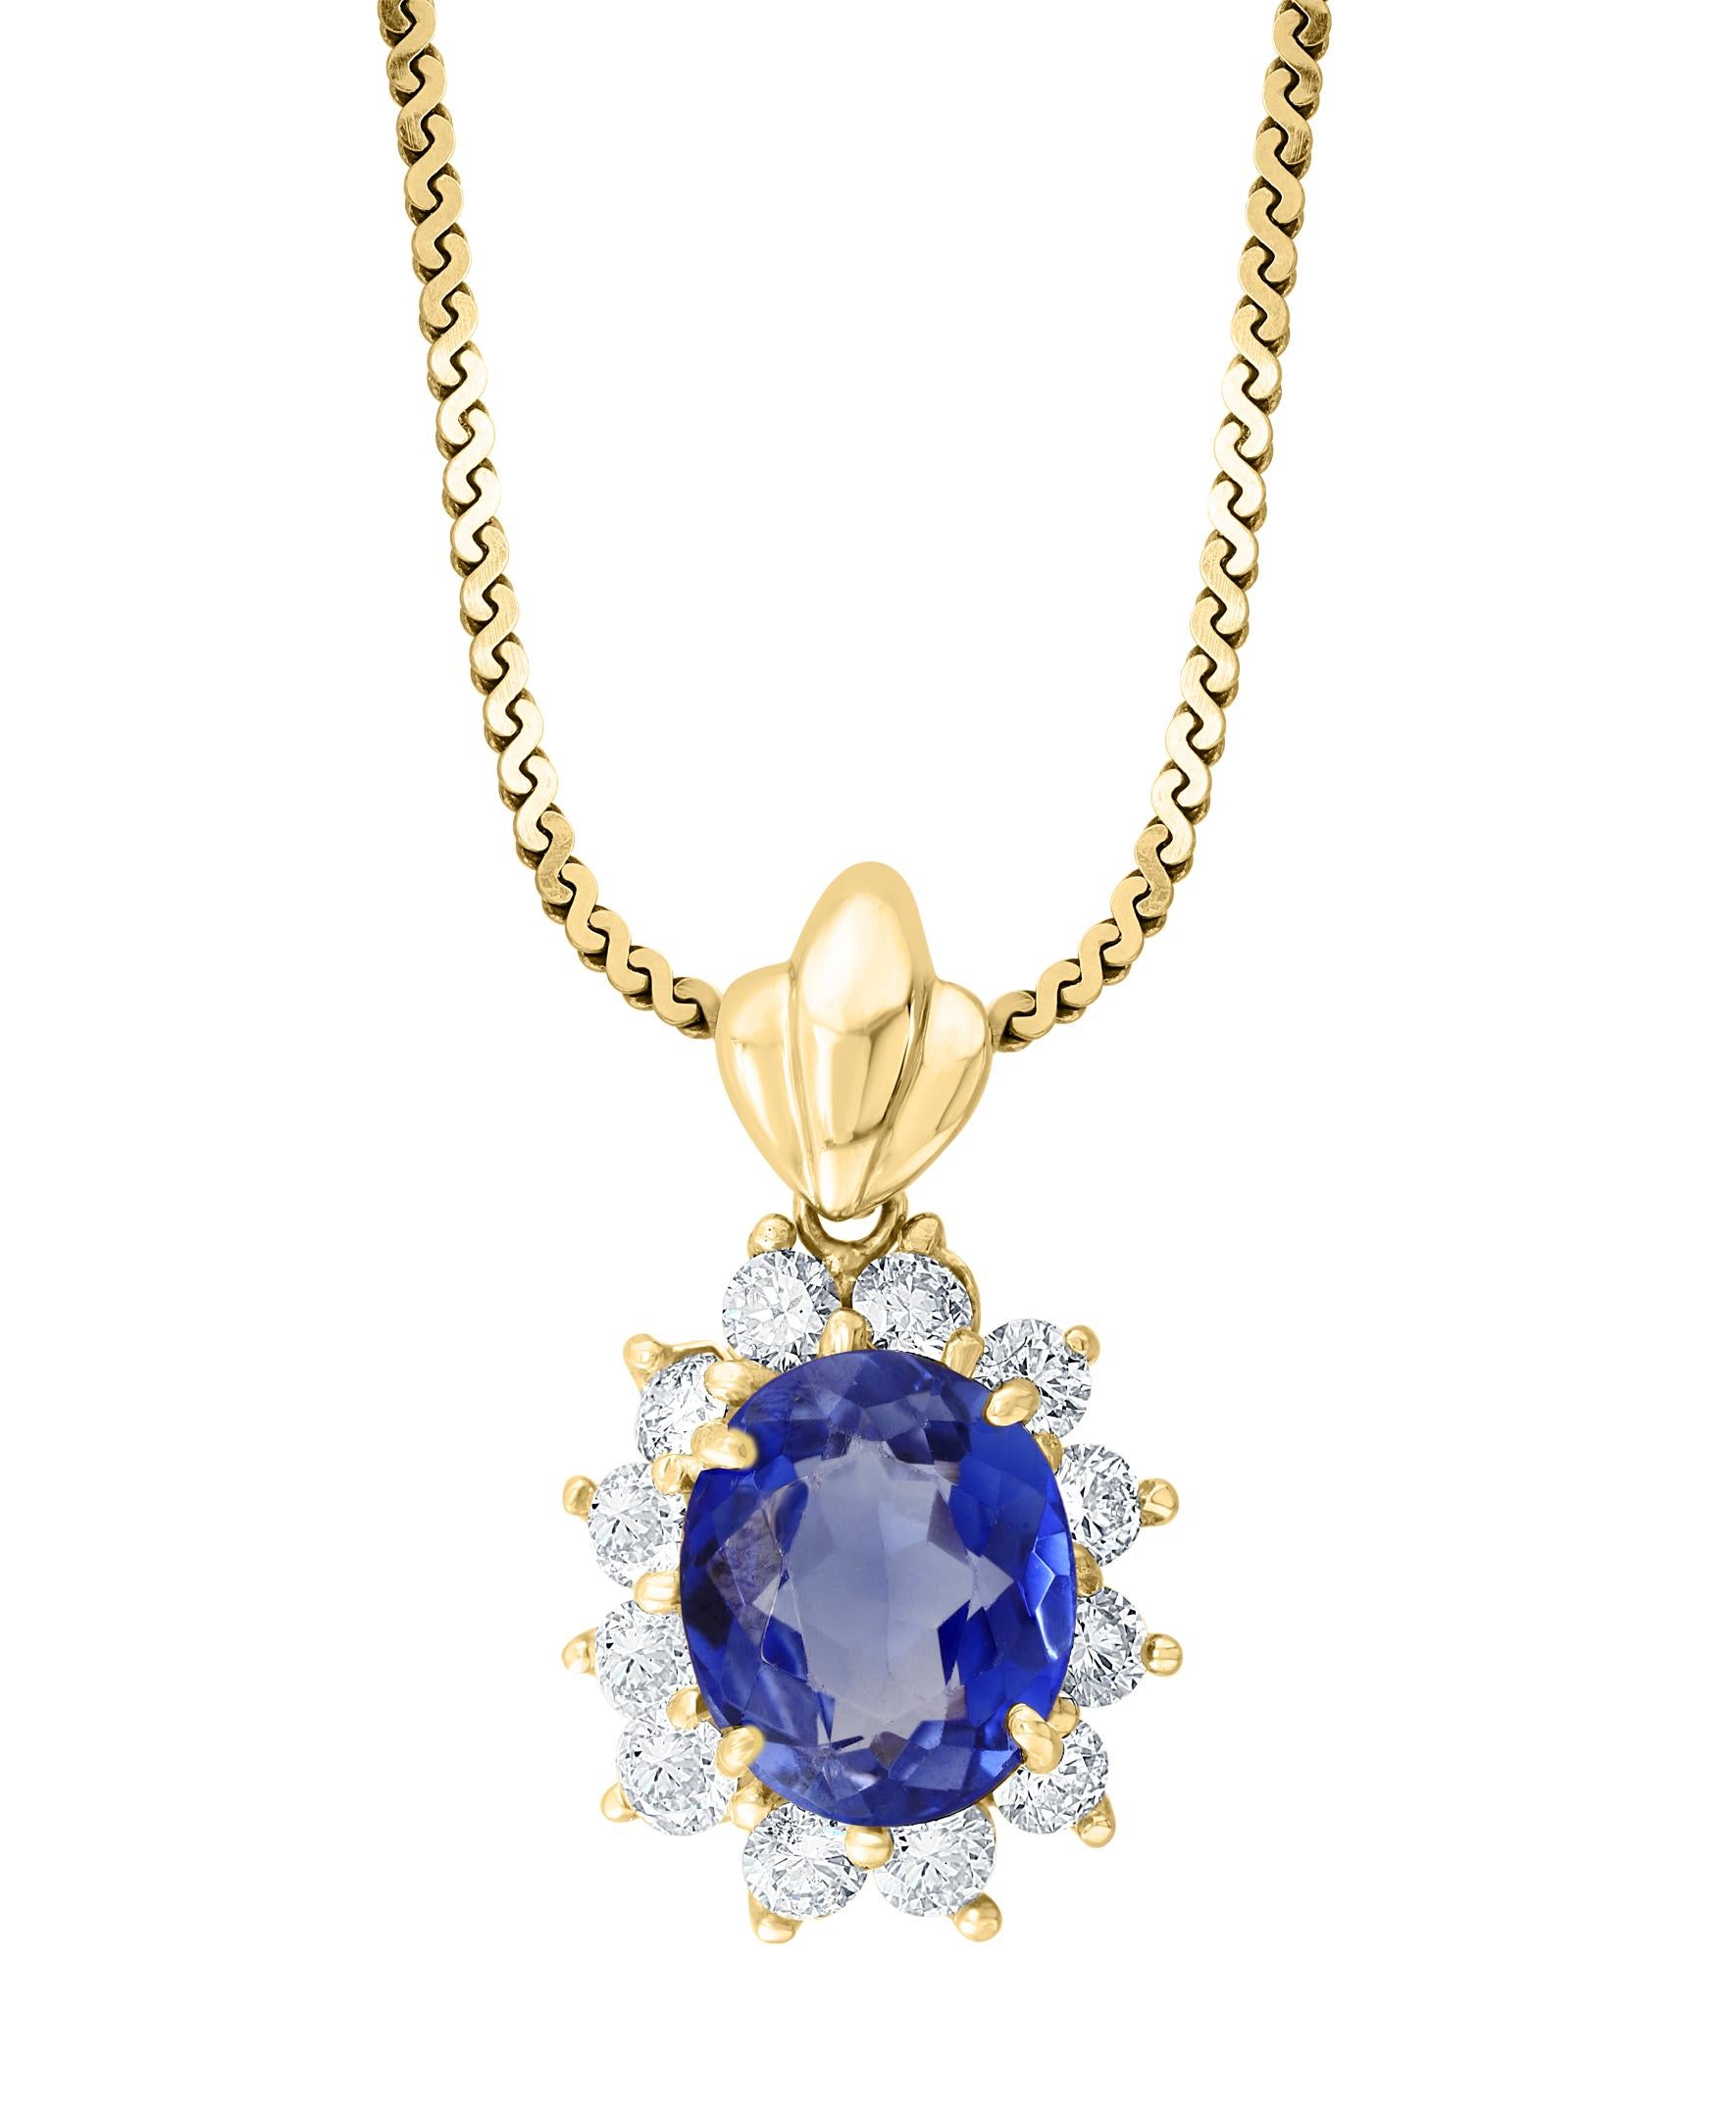 3 Carat Tanzanite and 1 Ct Diamond Pendant or Necklace 14 Karat Yellow Gold For Sale 8